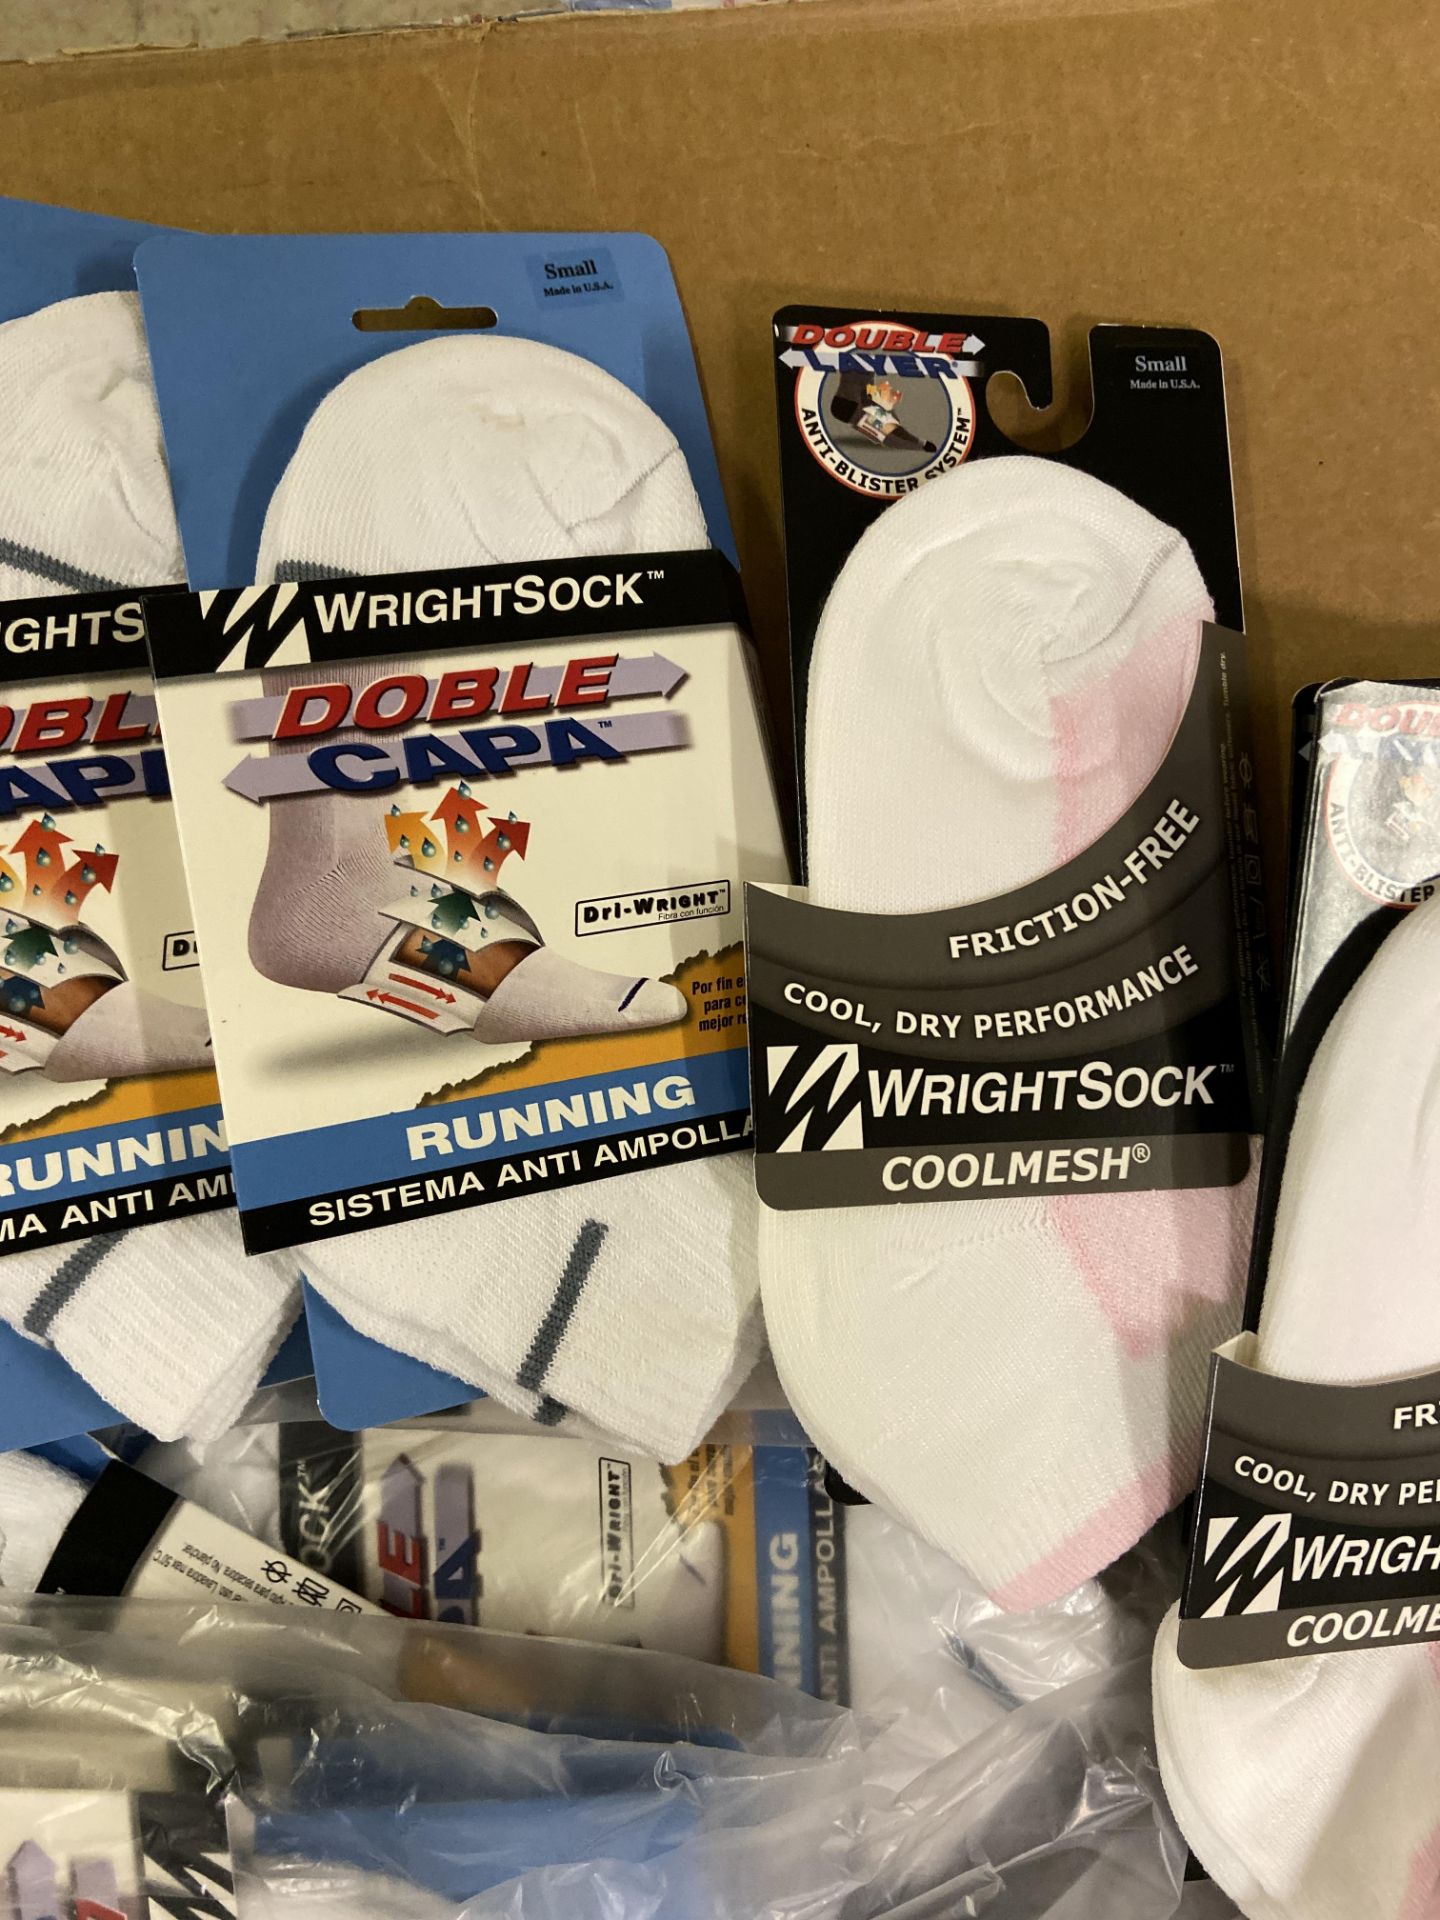 500+ packs of New Socks, Wrightsock Running and Coolmesh, Double Layer, White w. Various Stripes - Image 4 of 7